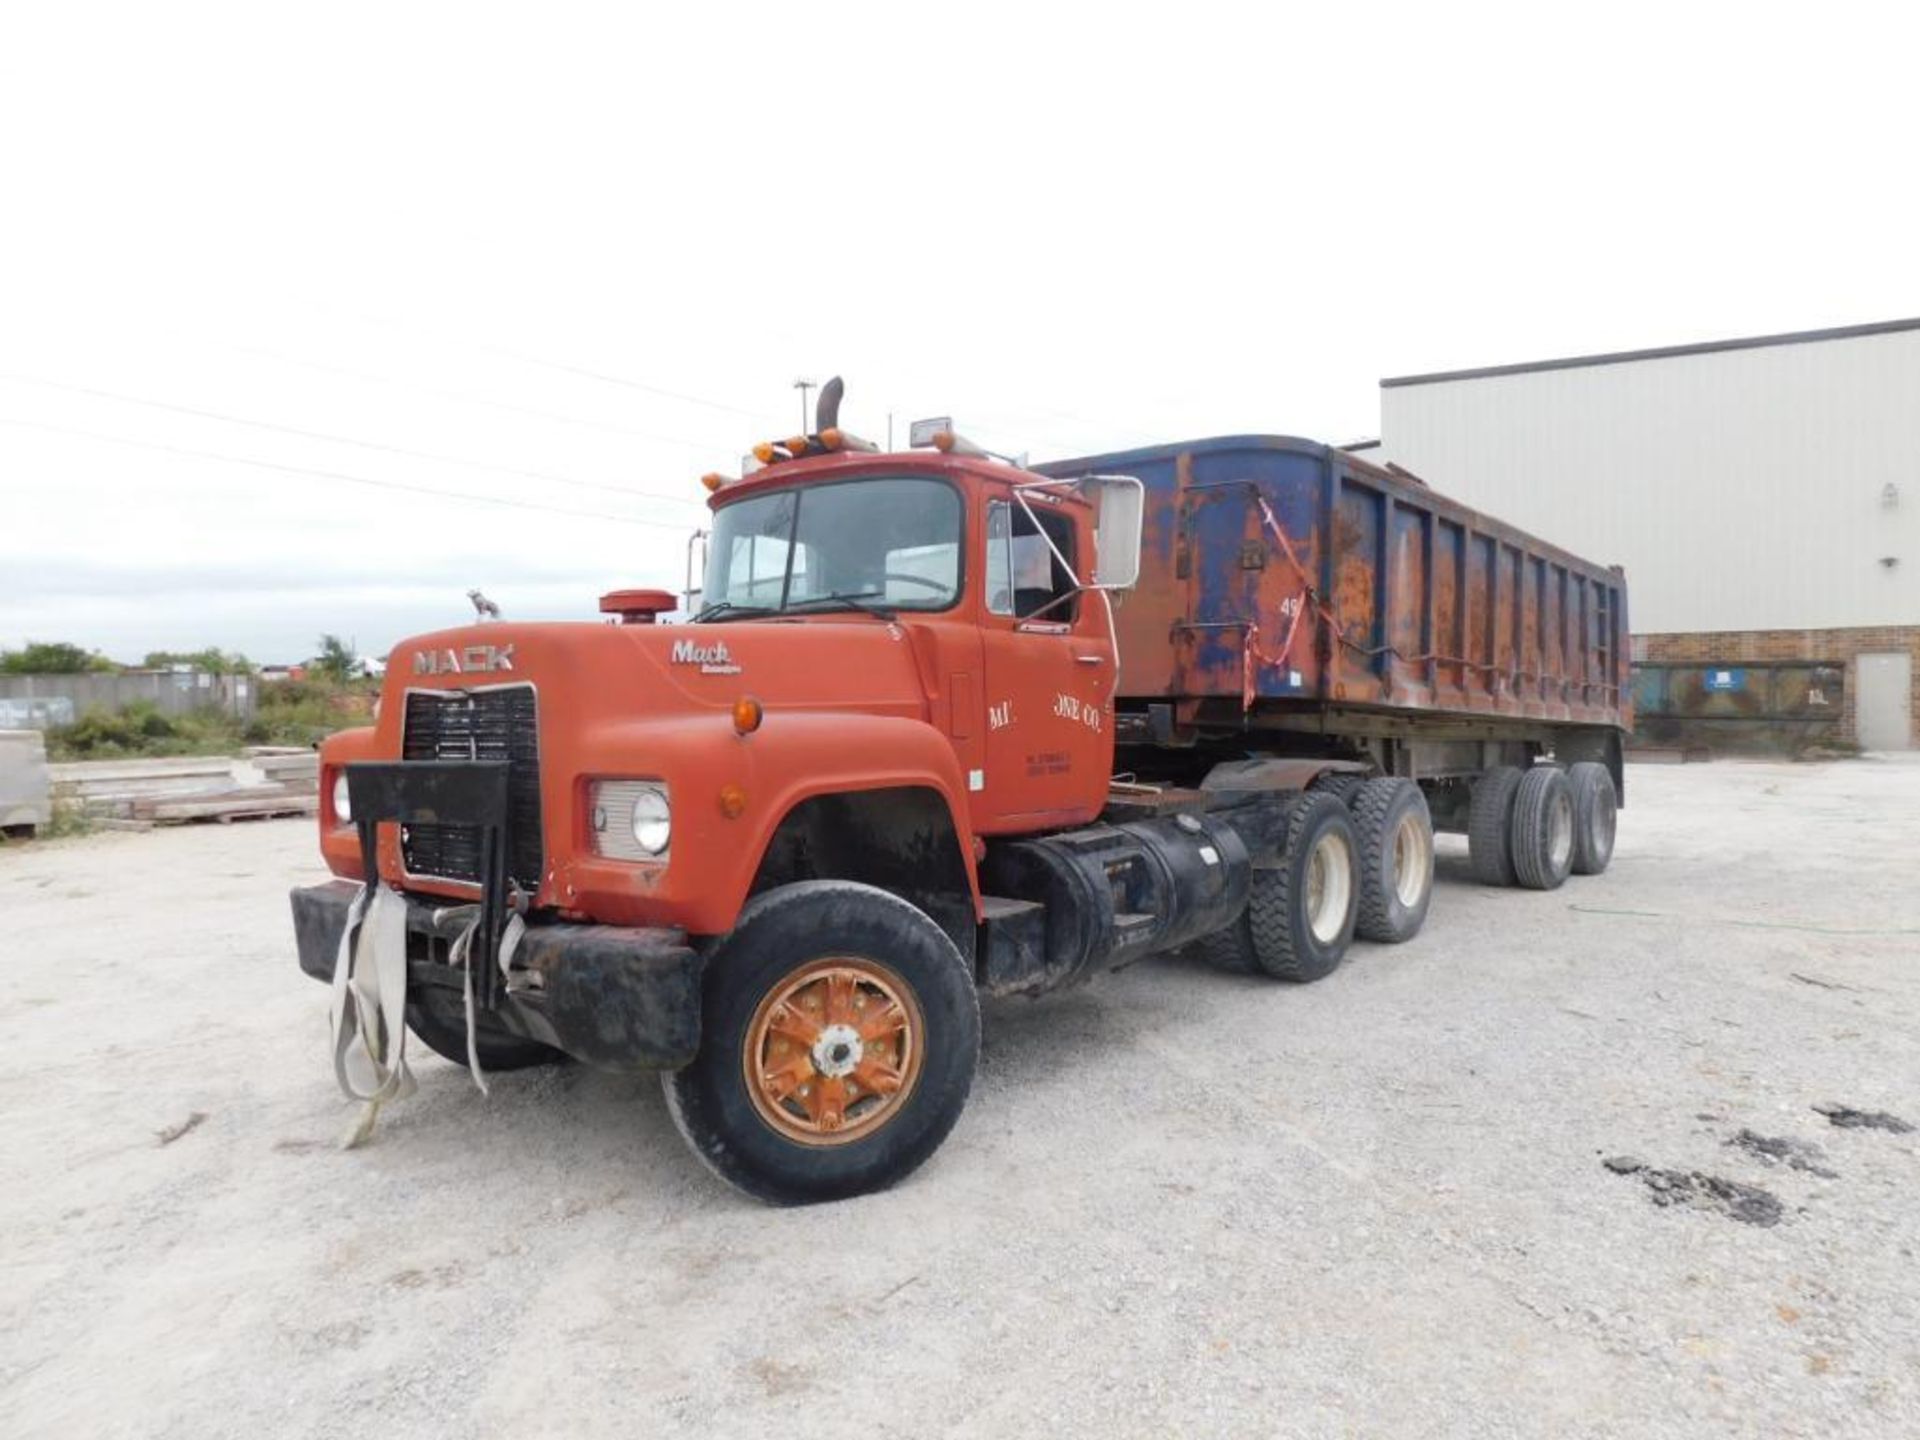 LOT: 1989 Mack T.A. Truck Tractor Model R688ST, VIN 1M2N187Y4KW029817, 27,017 hours indicated w/T.A. - Image 4 of 9